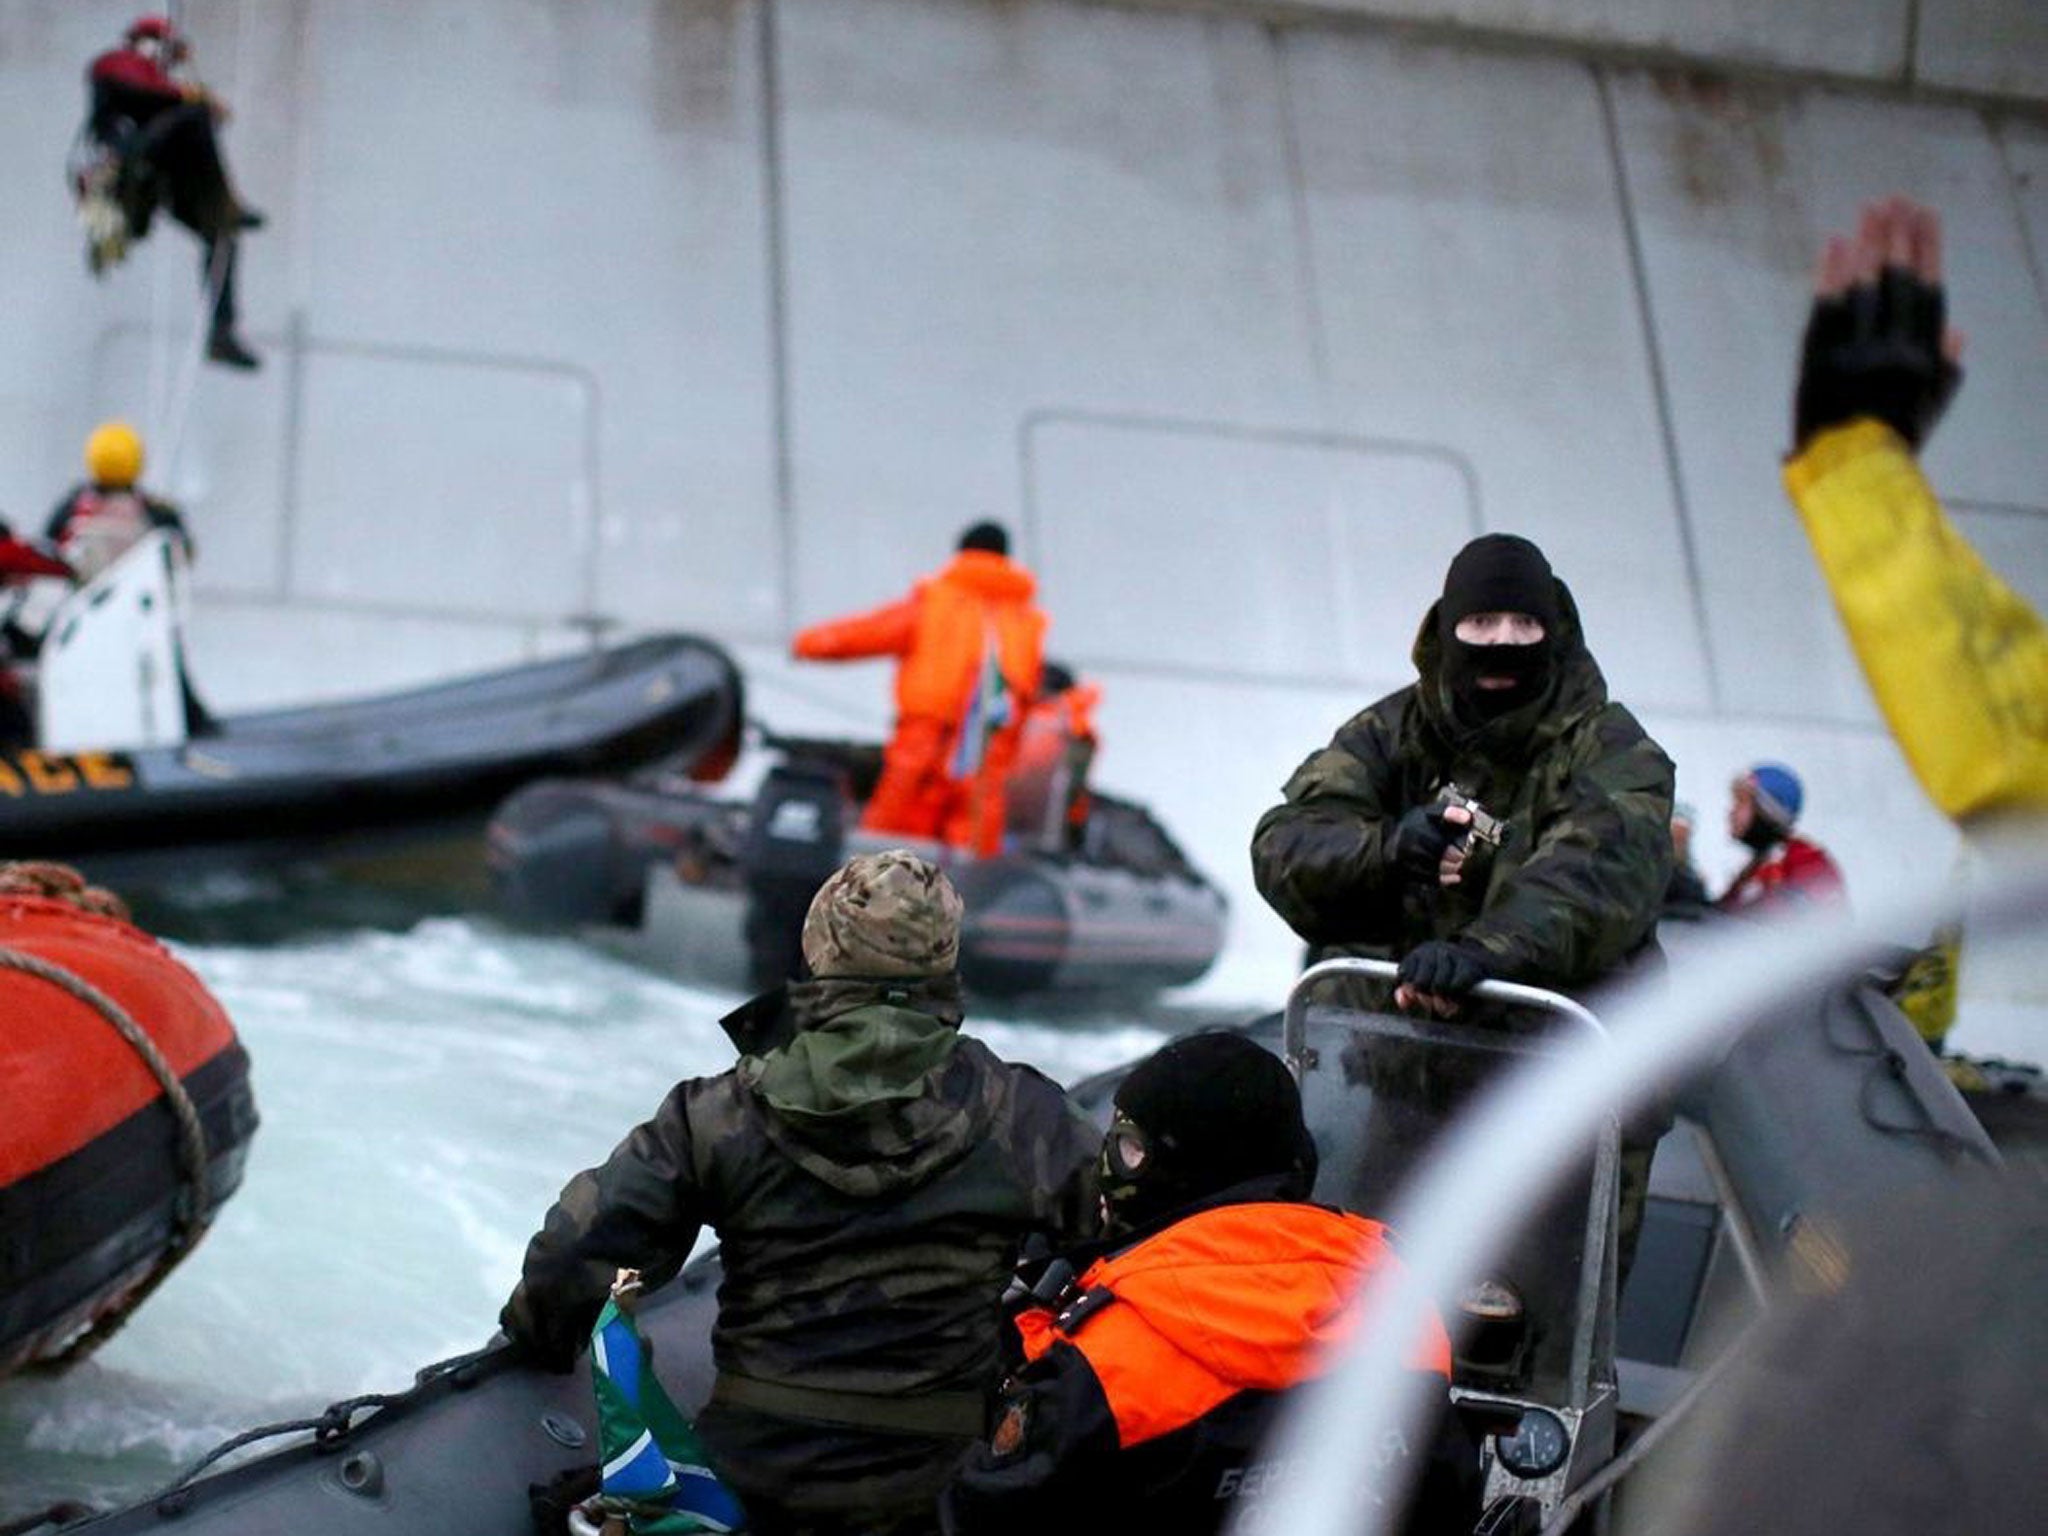 Greenpeace took this photo of a camouflaged officer from the Russian Coast Guard pointing a gun at an activist